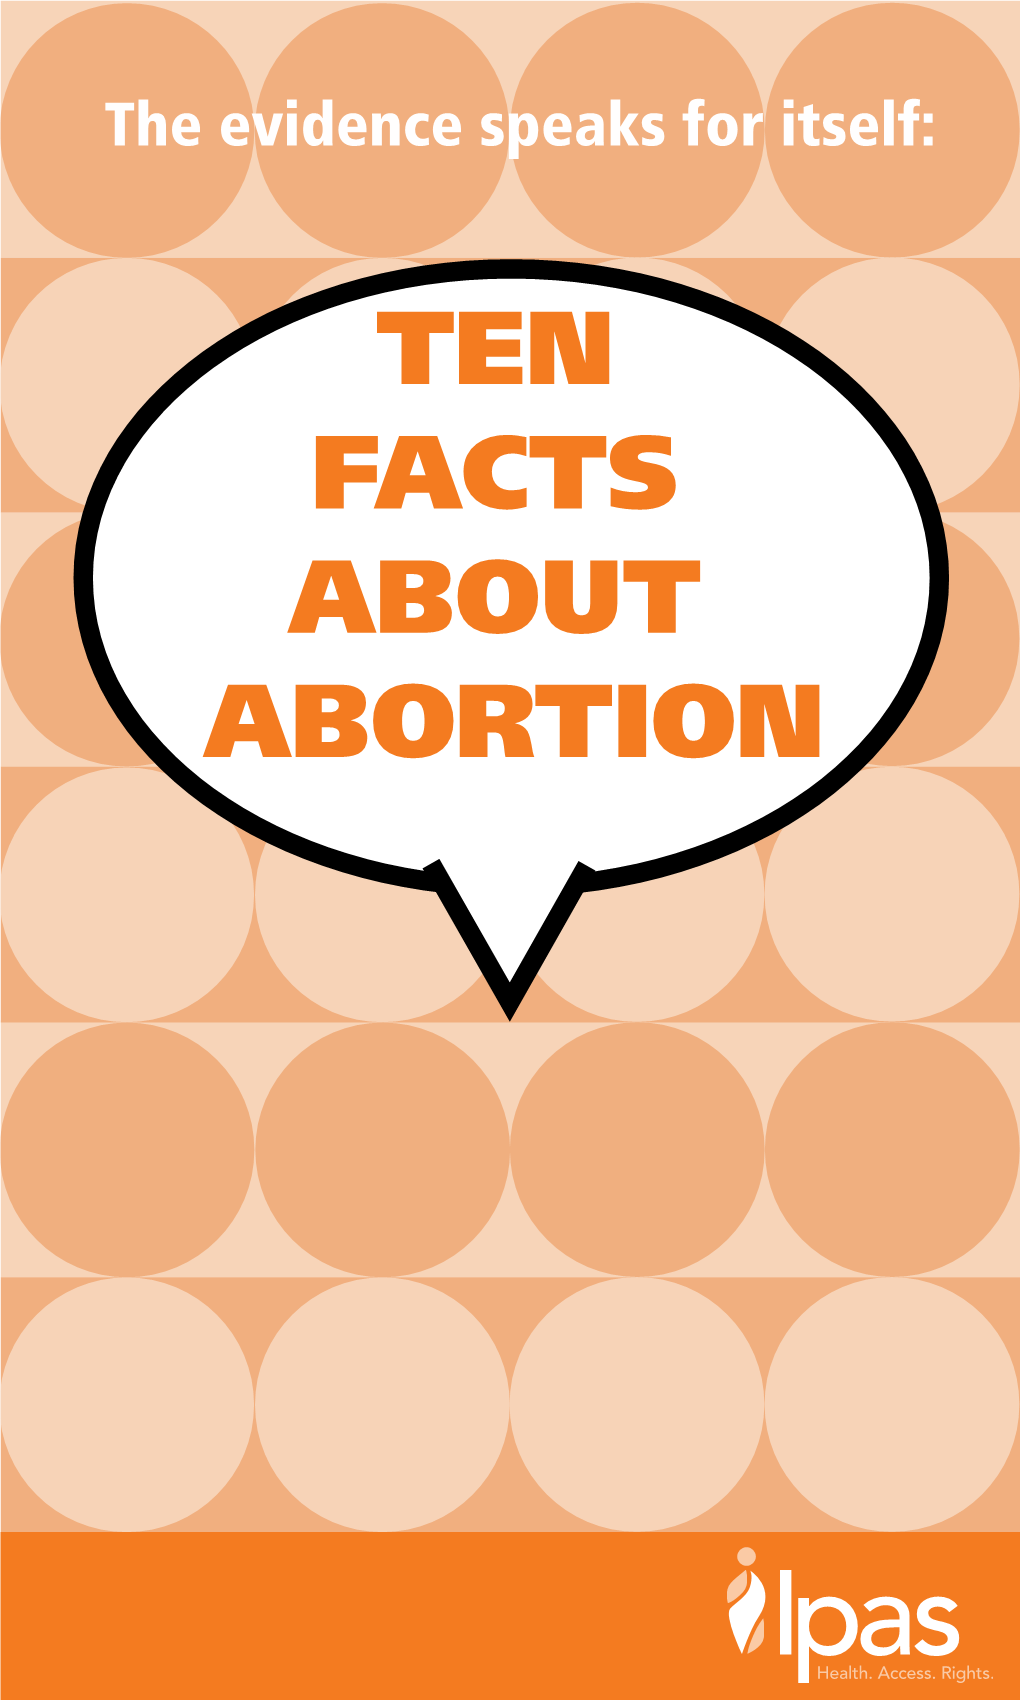 TEN FACTS ABOUT ABORTION ISBN: 1-933095-60-1 © 2010, 2013 Ipas